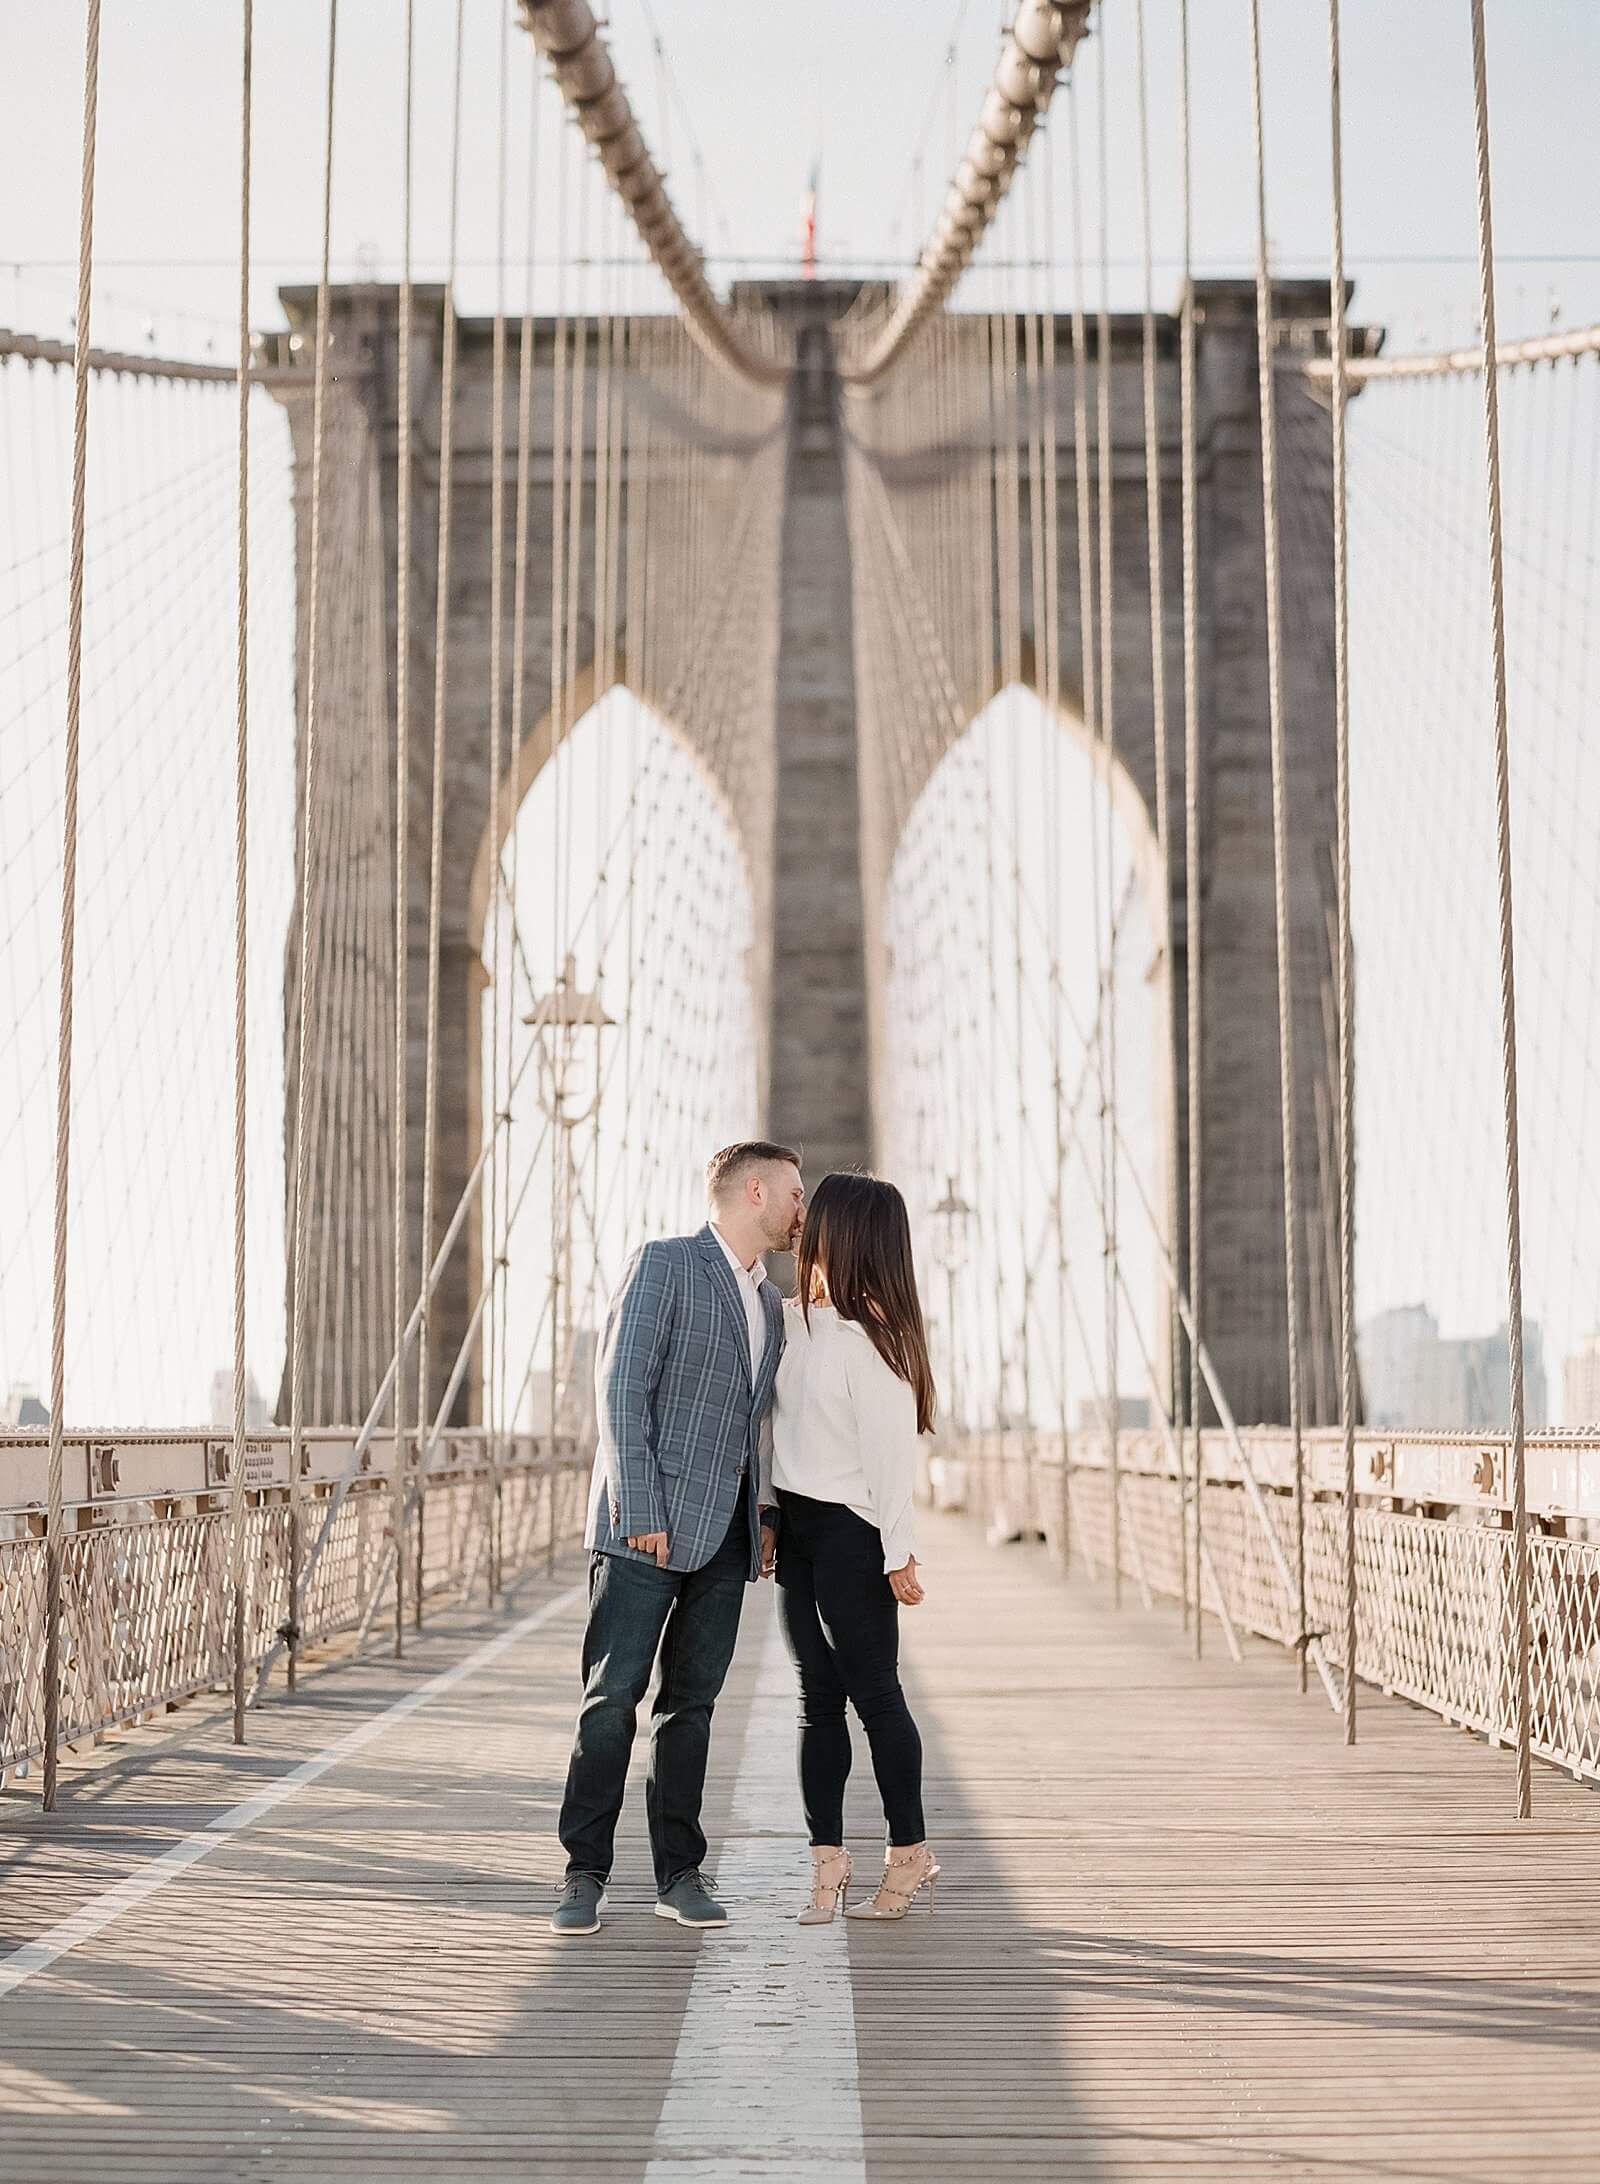 Couple during their engagement session in Manhattan.